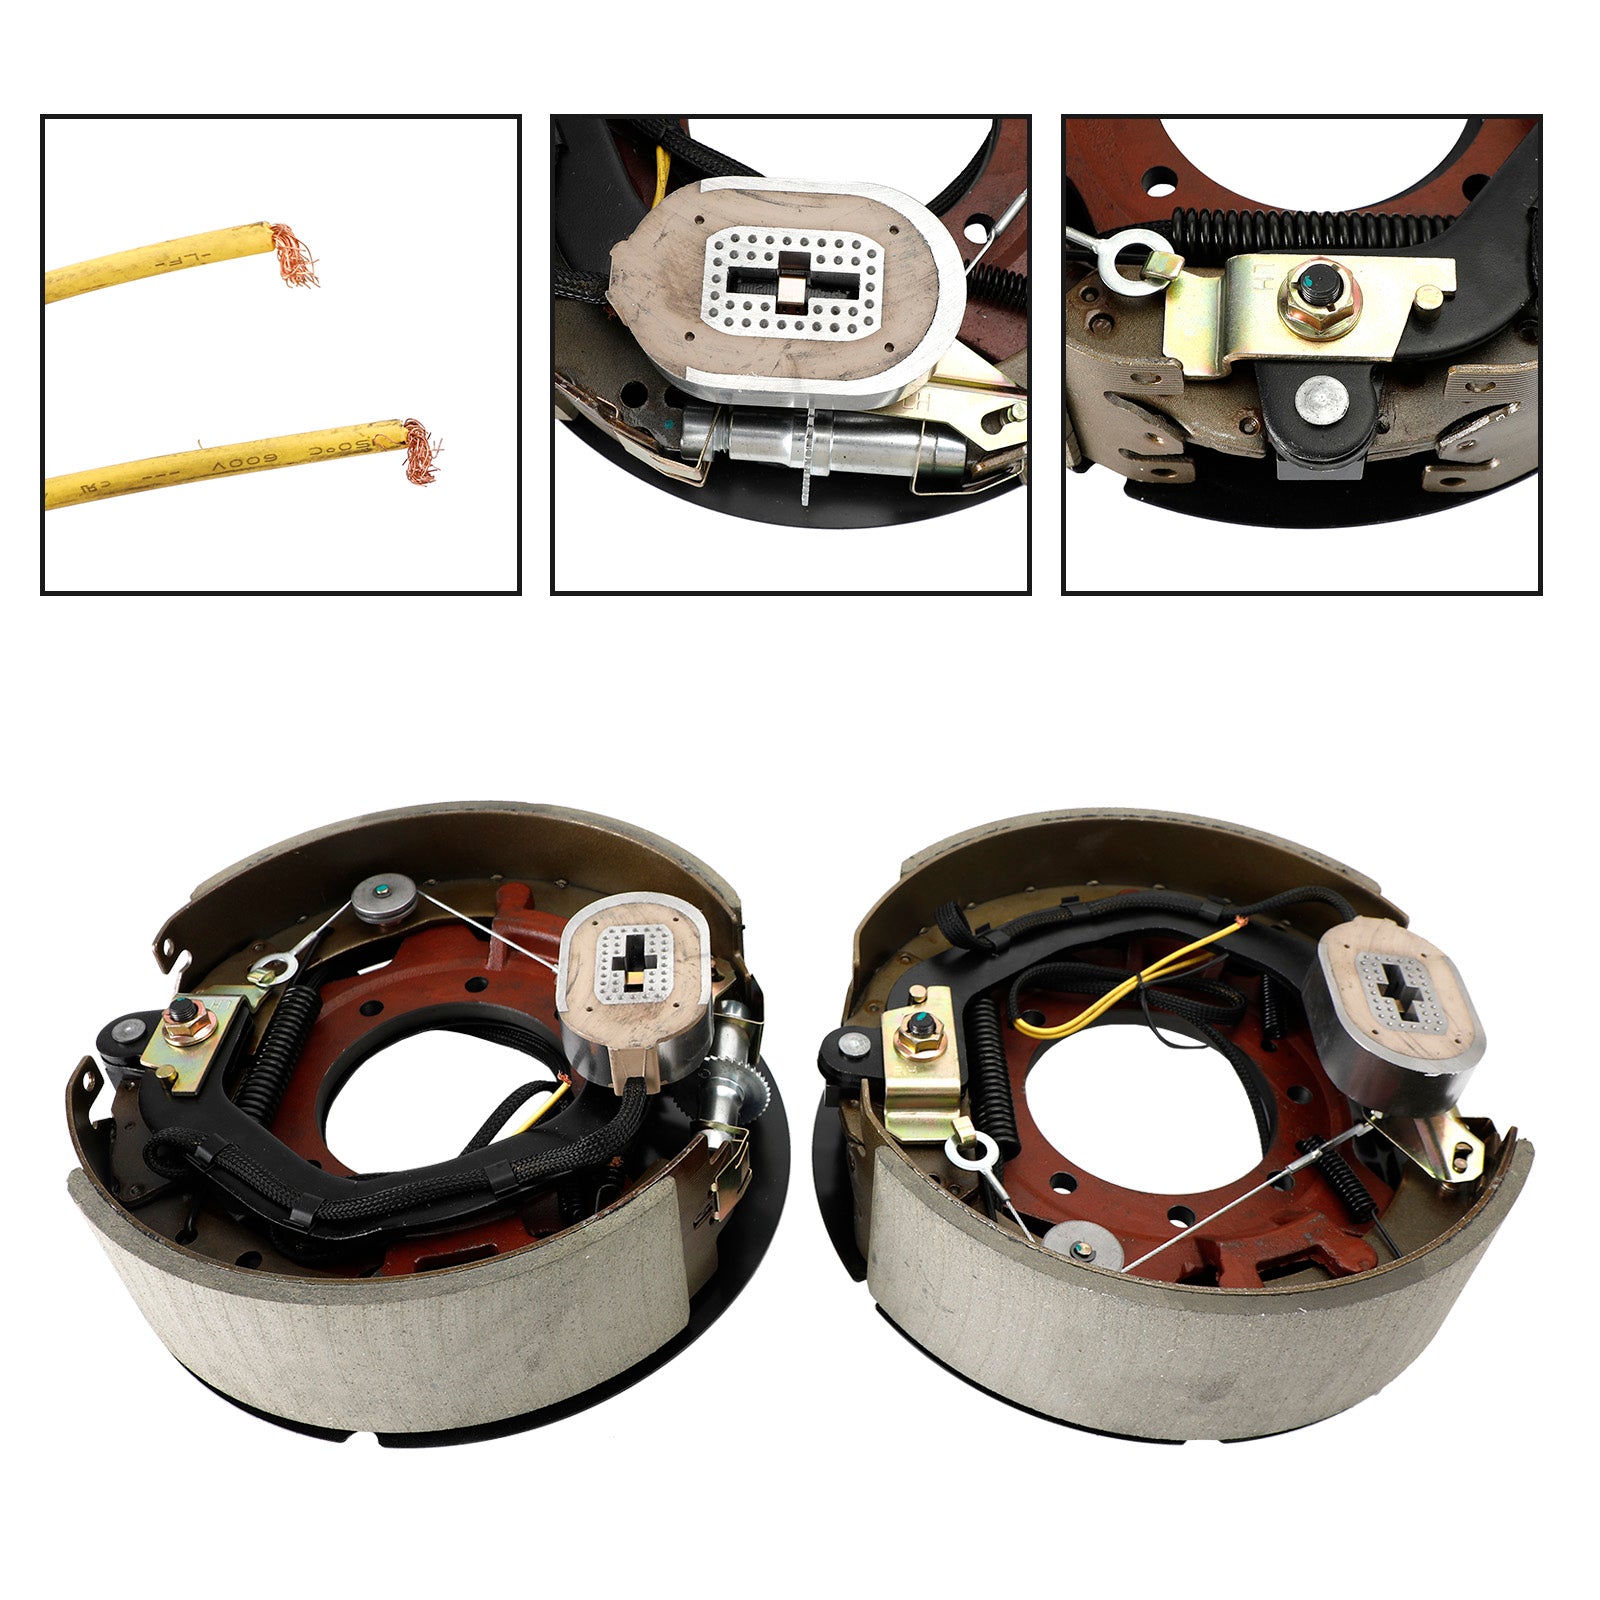 Self-Adjusting 12-1/4" Electric Trailer Brake Kit with Shields - Left/Right Hand for 10K Capacity - 0